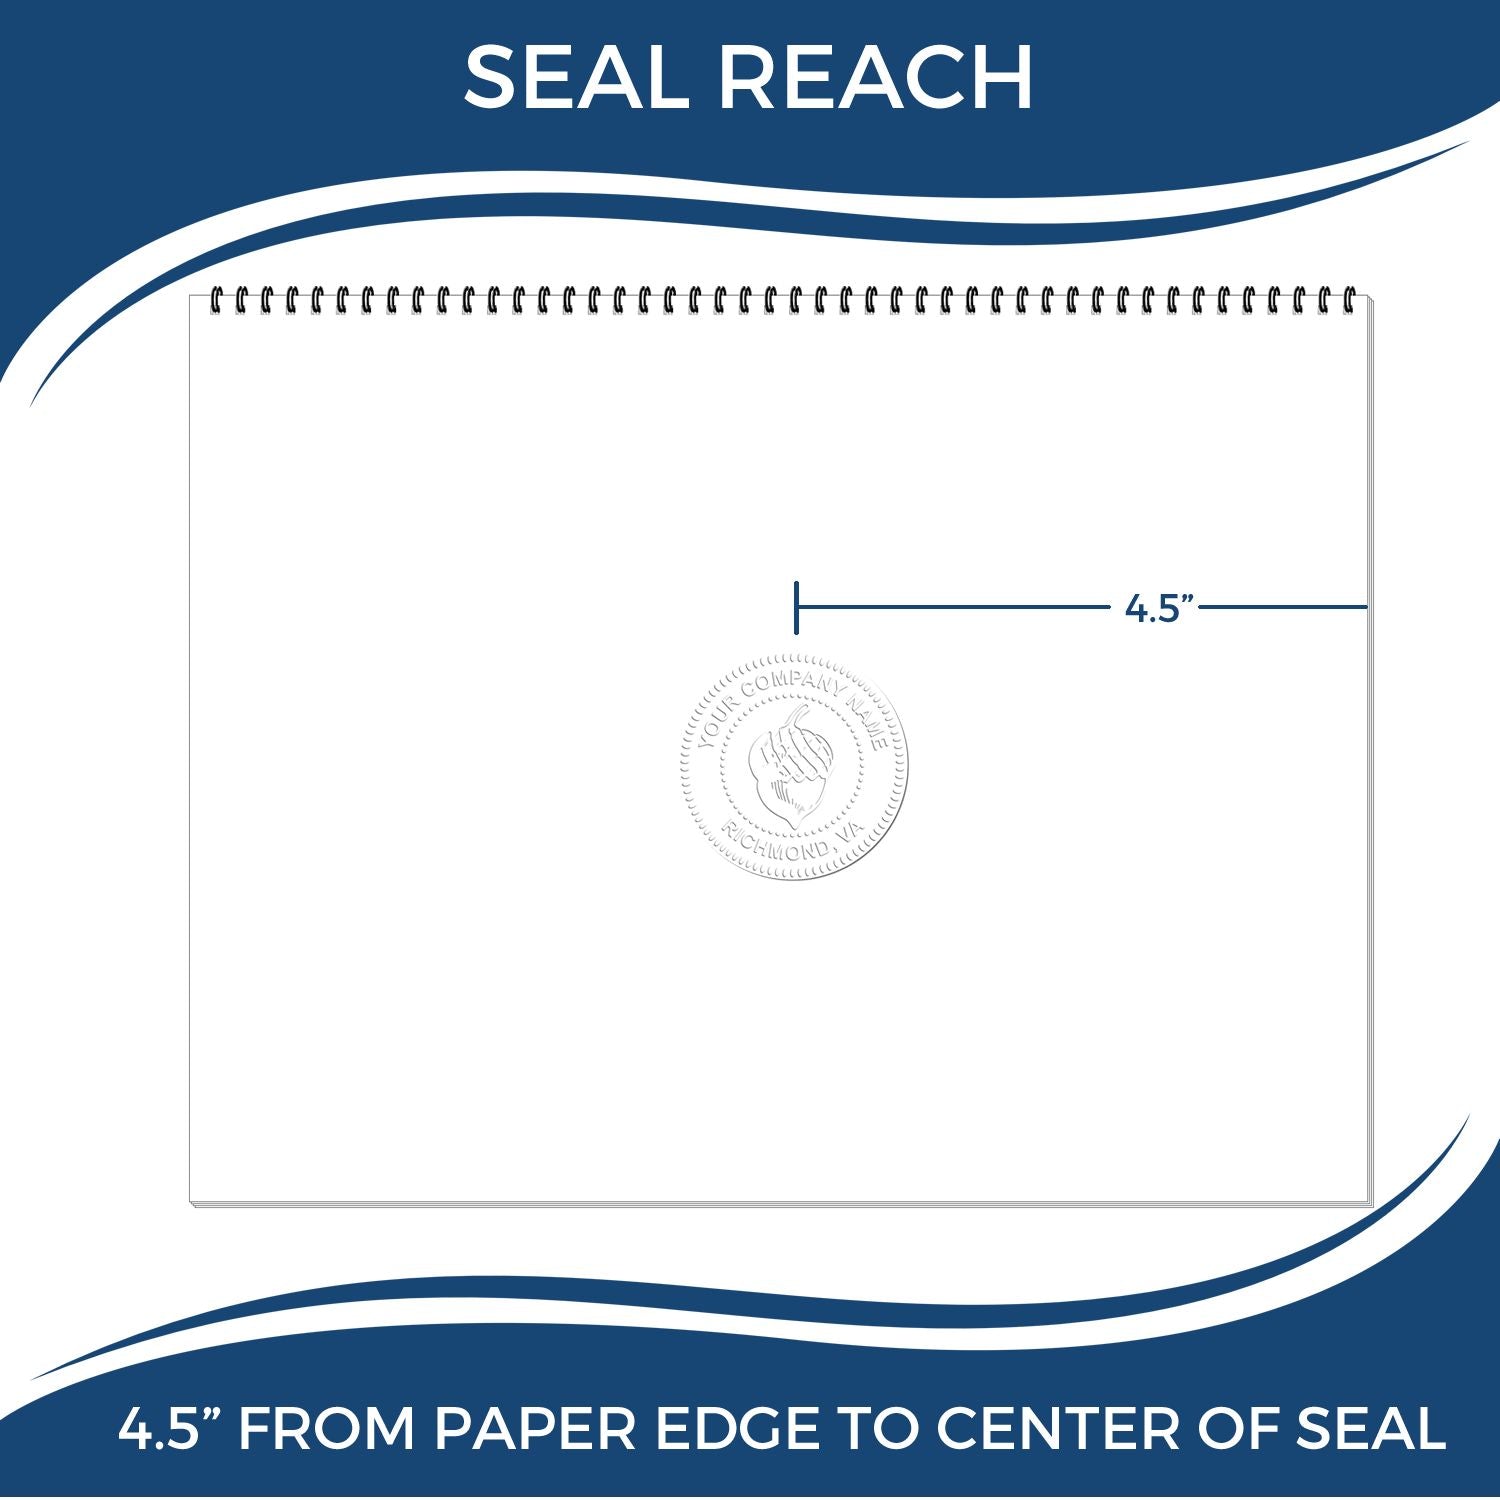 An infographic showing the seal reach which is represented by a ruler and a miniature seal image of the State of Alaska Extended Long Reach Engineer Seal